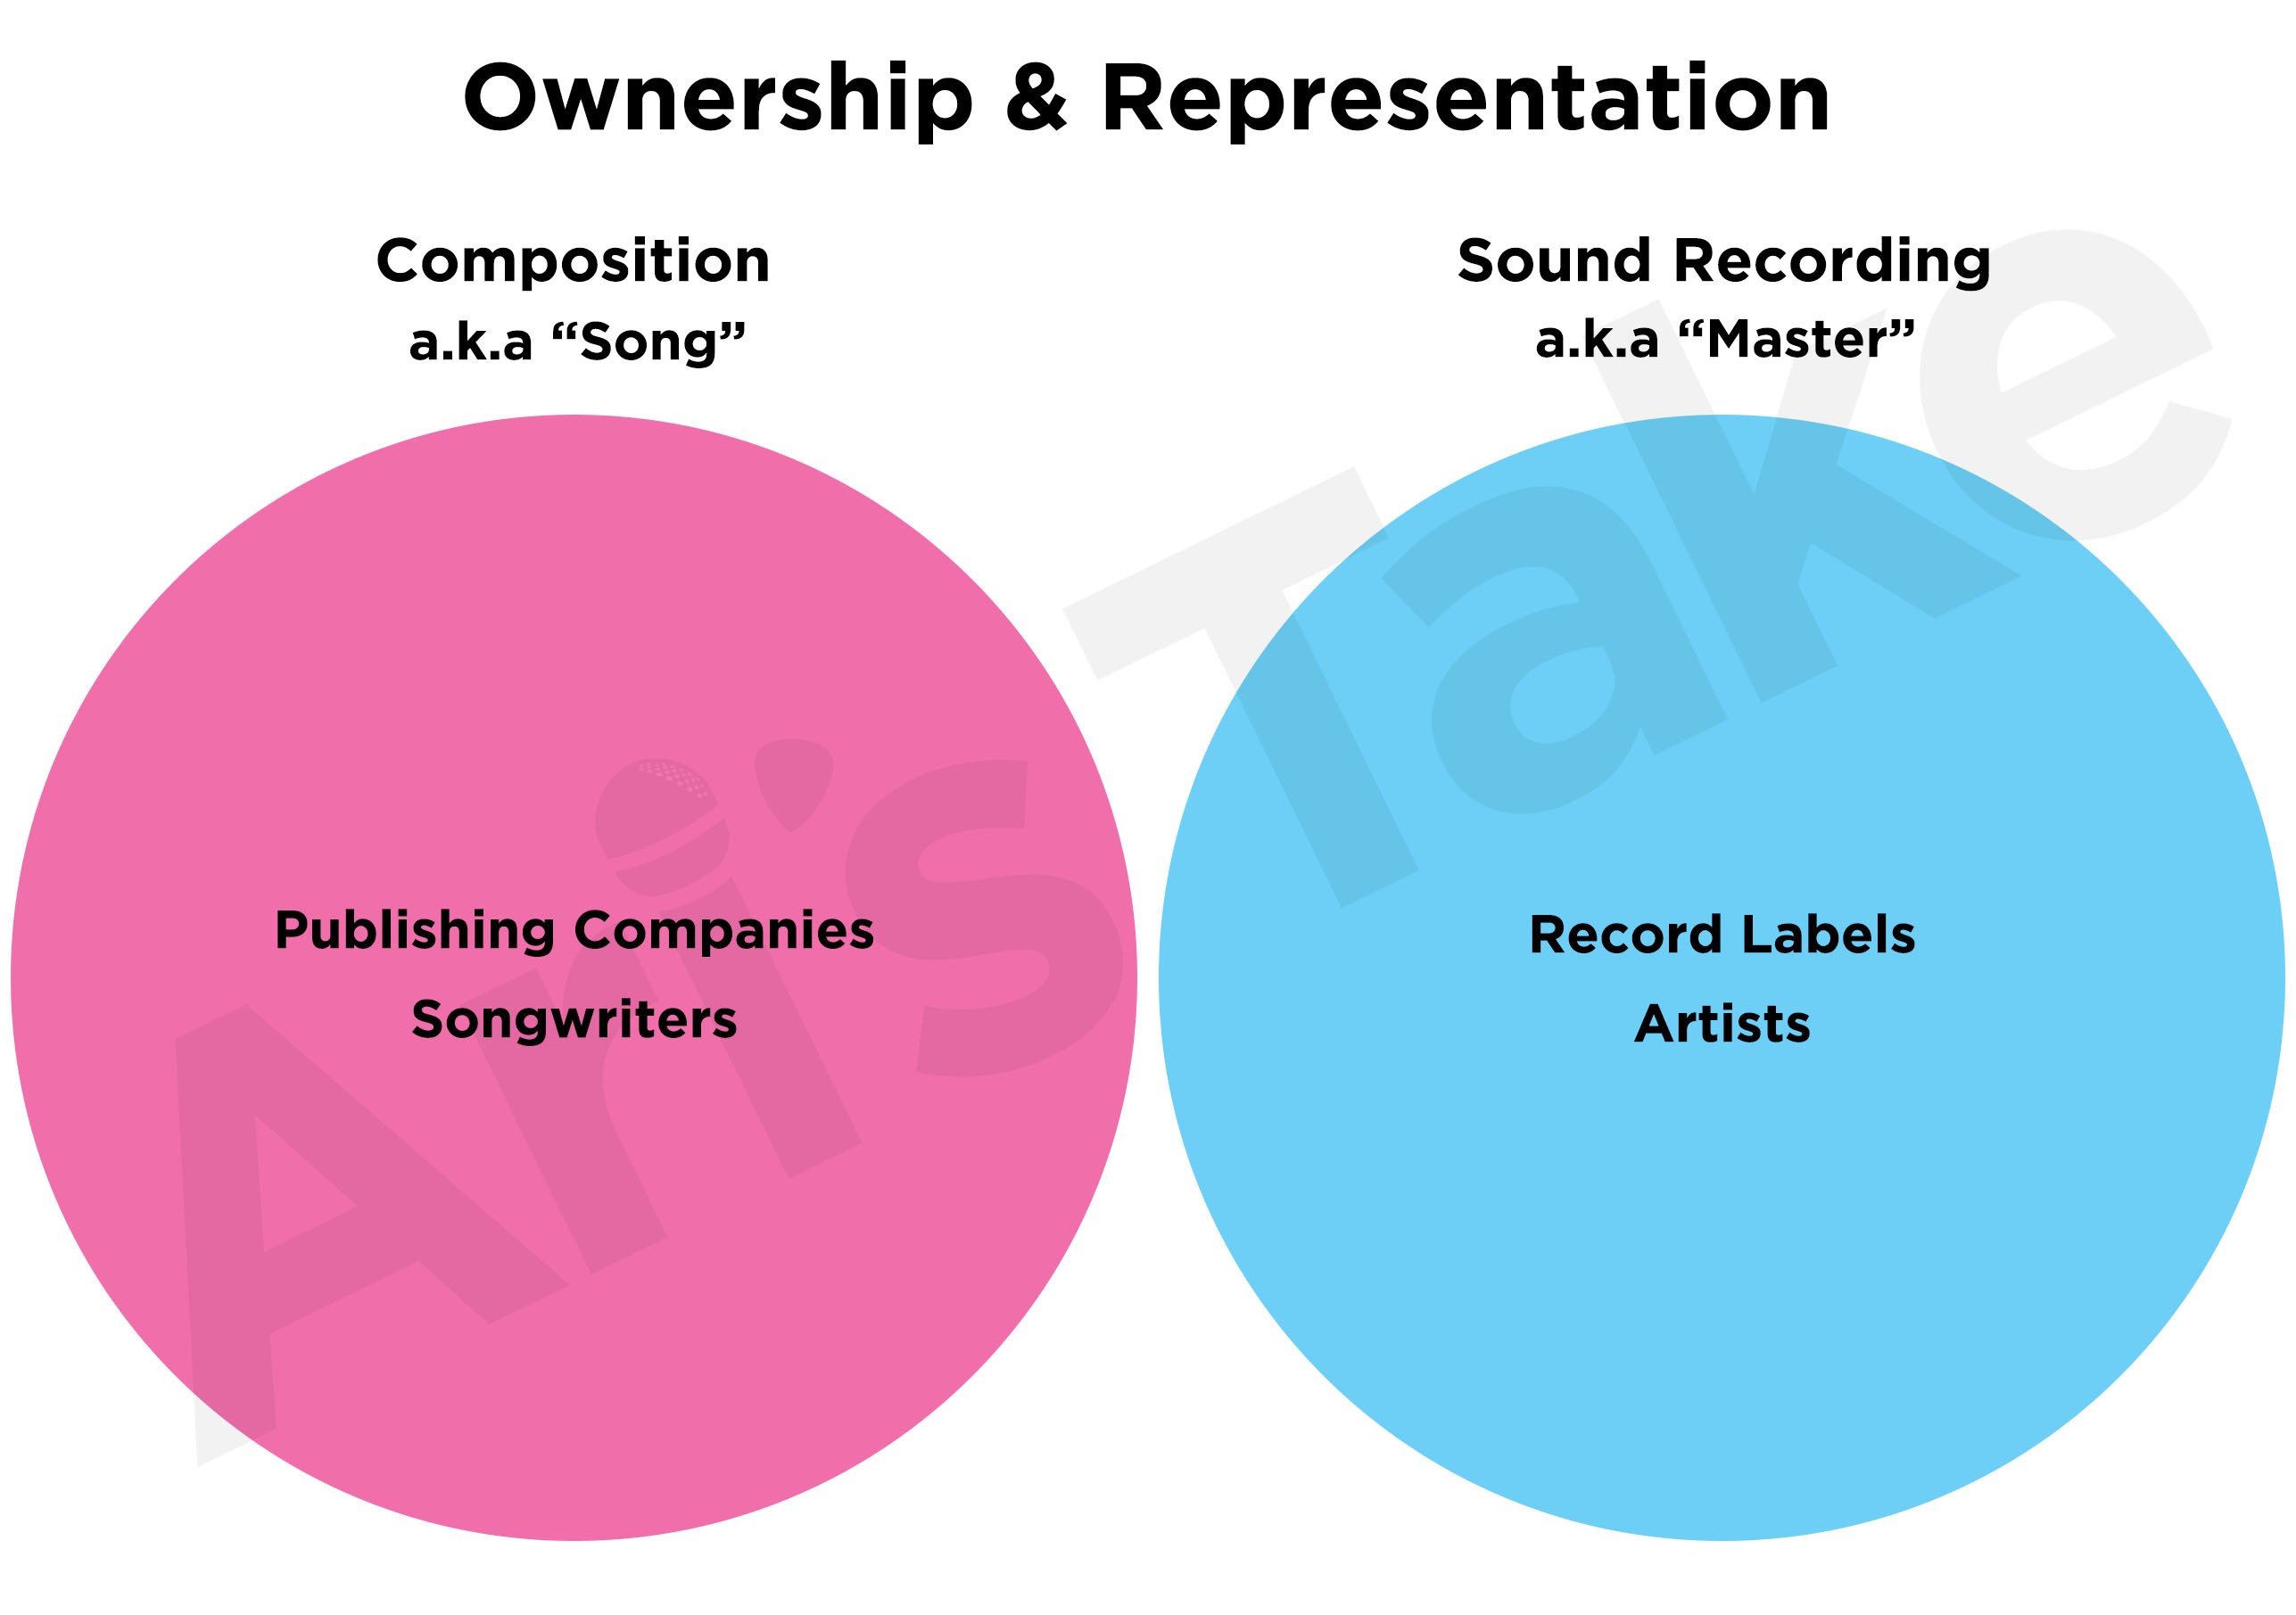 Producer and Songwriter Ownership and Representation